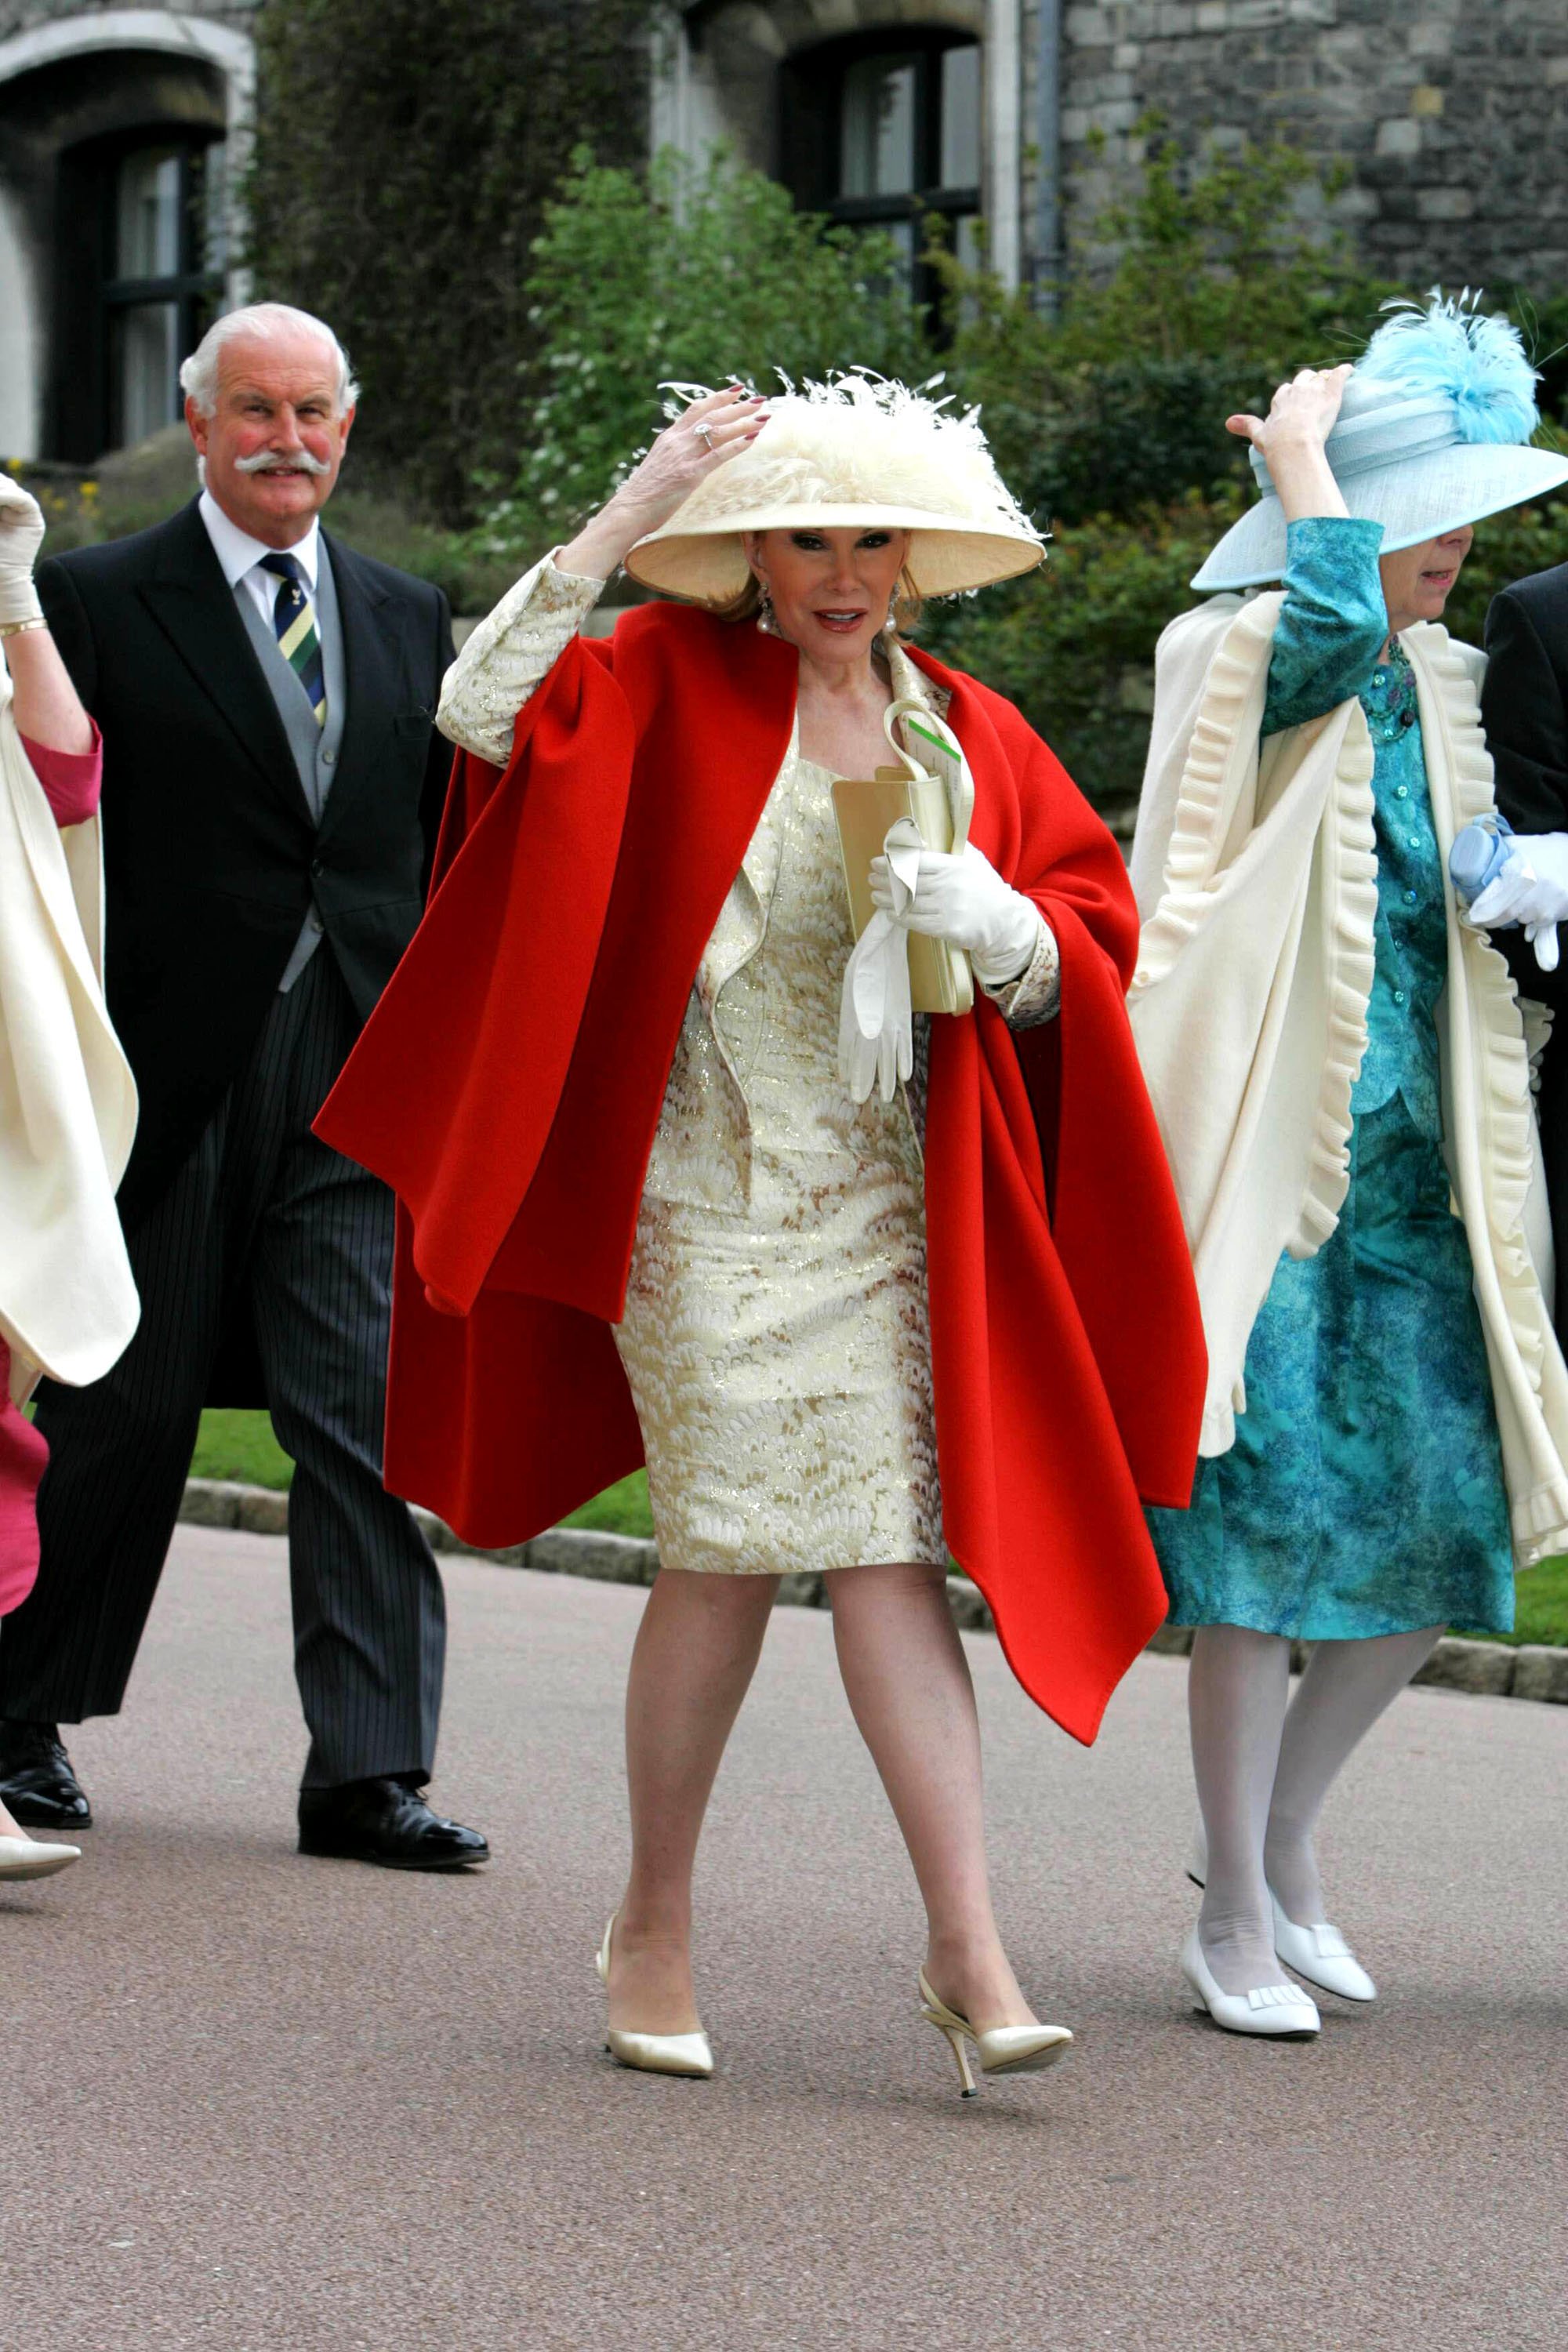 Joan Rivers attends the royal wedding